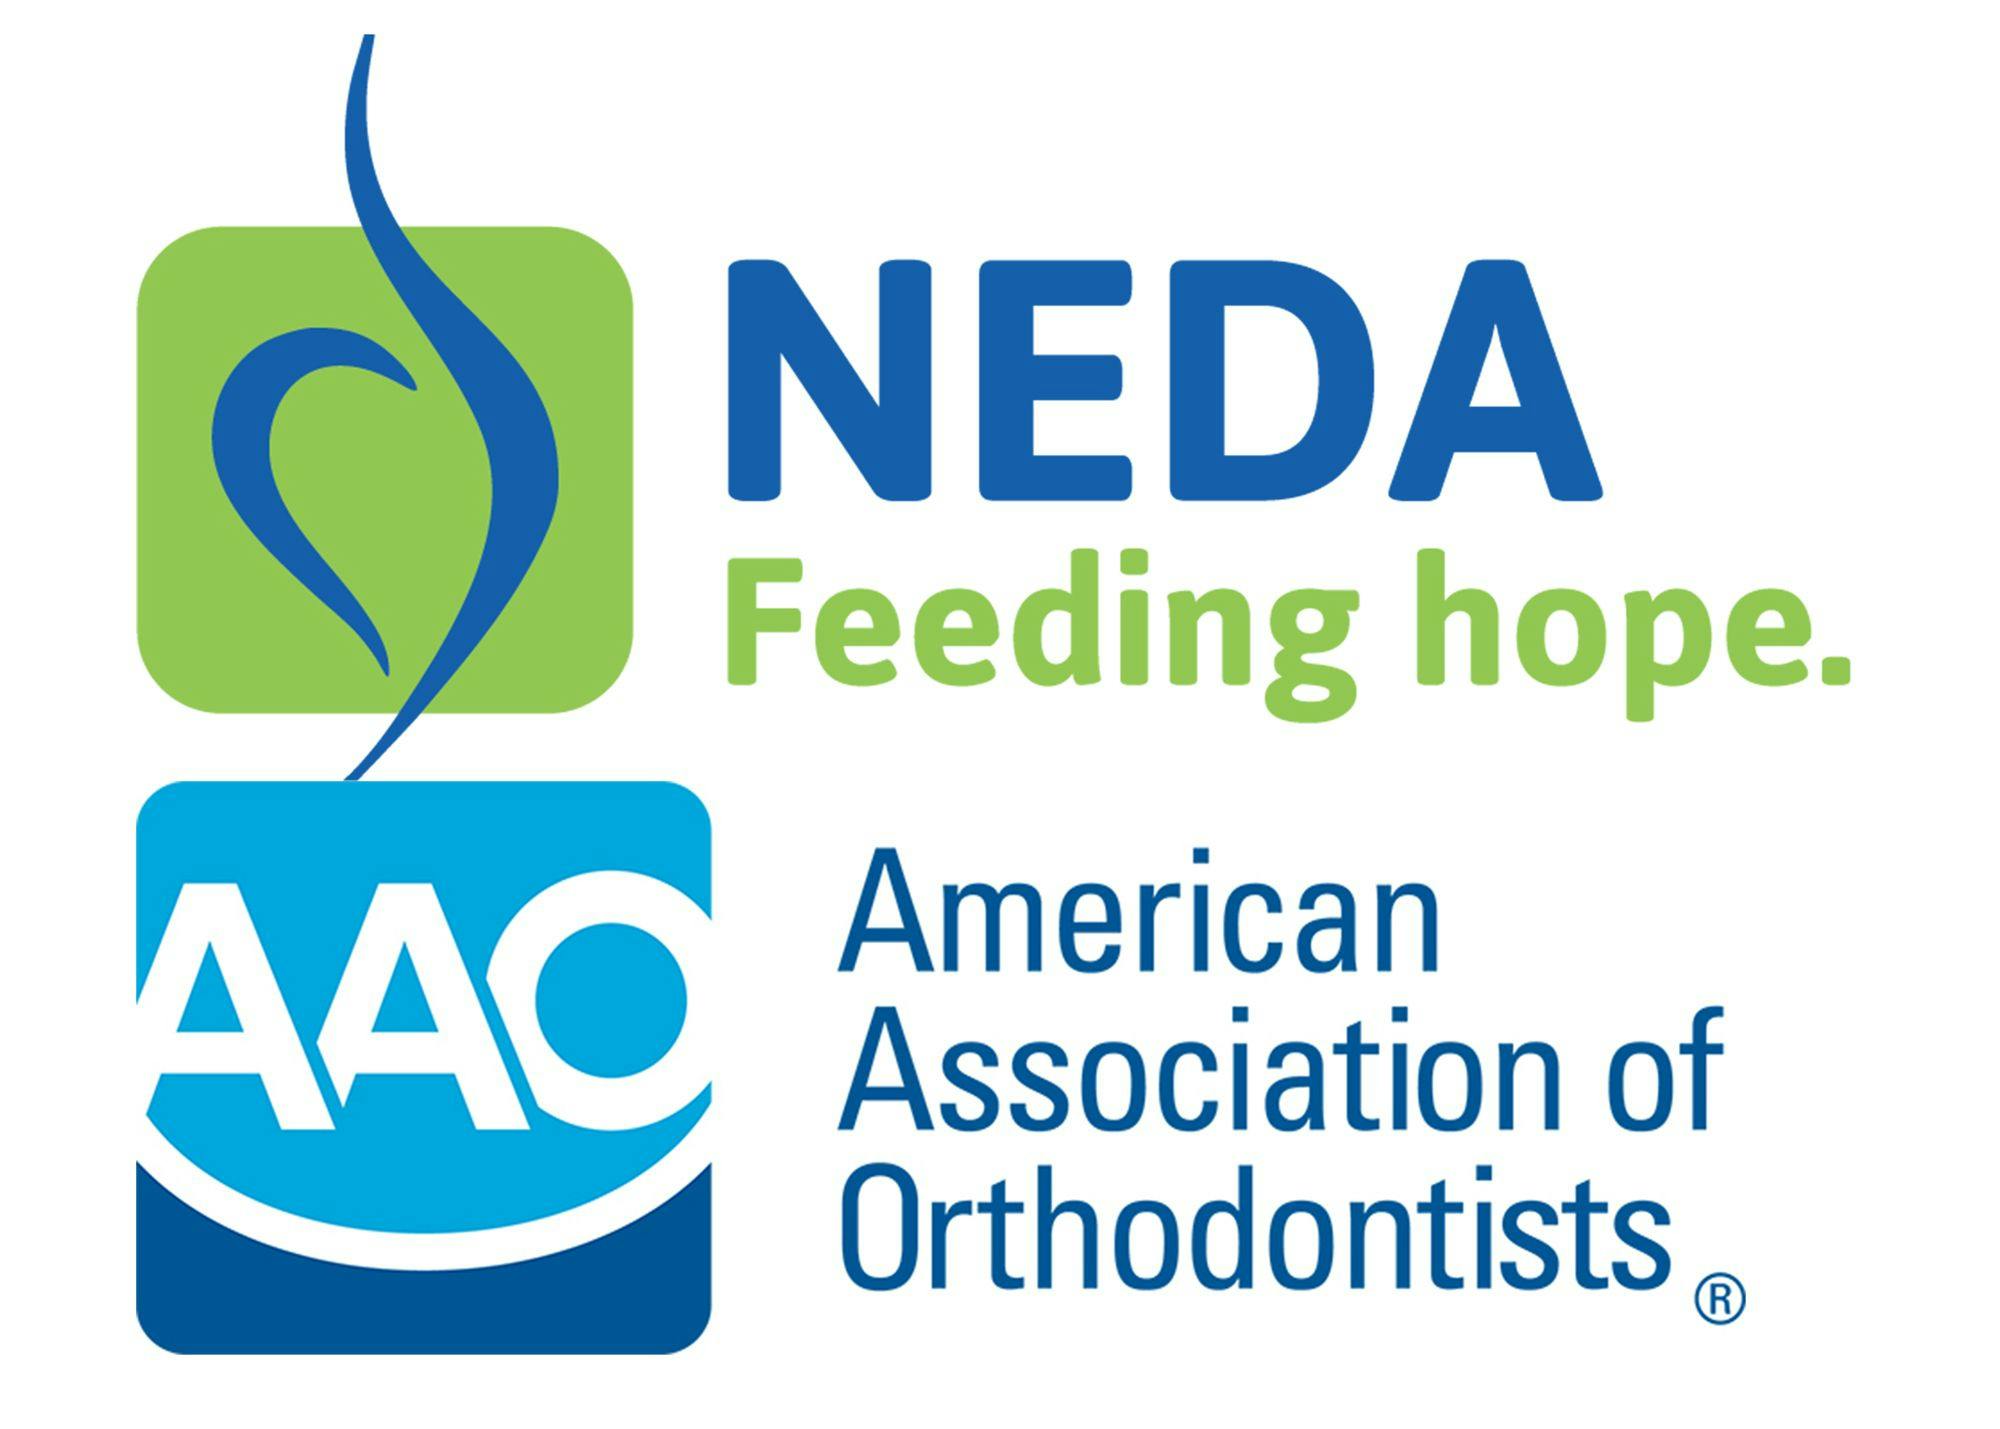 American Association of Orthodontists Partners with National Eating Disorders Association